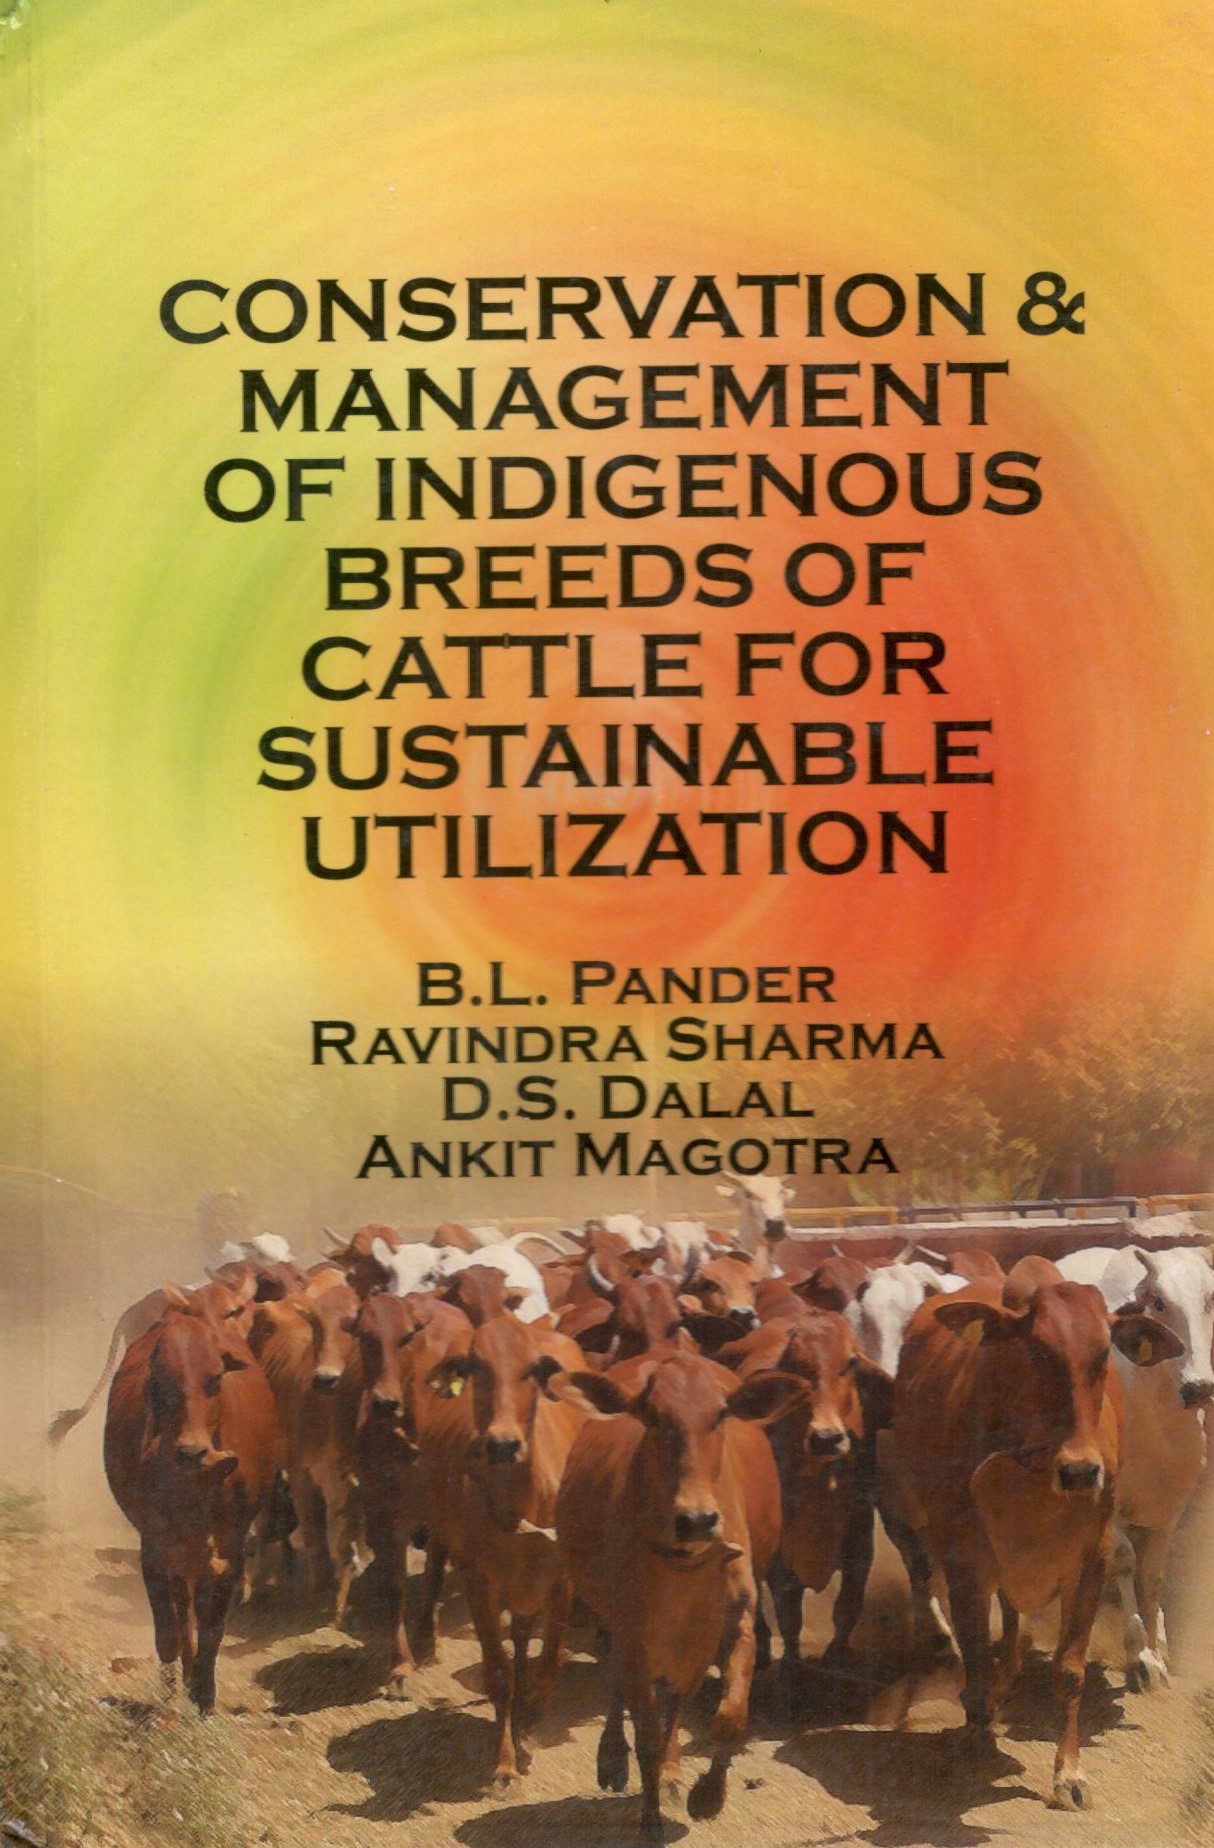 Conservation & Management Of Indigenous Breeds Of Cattle For Sustainable Utilization